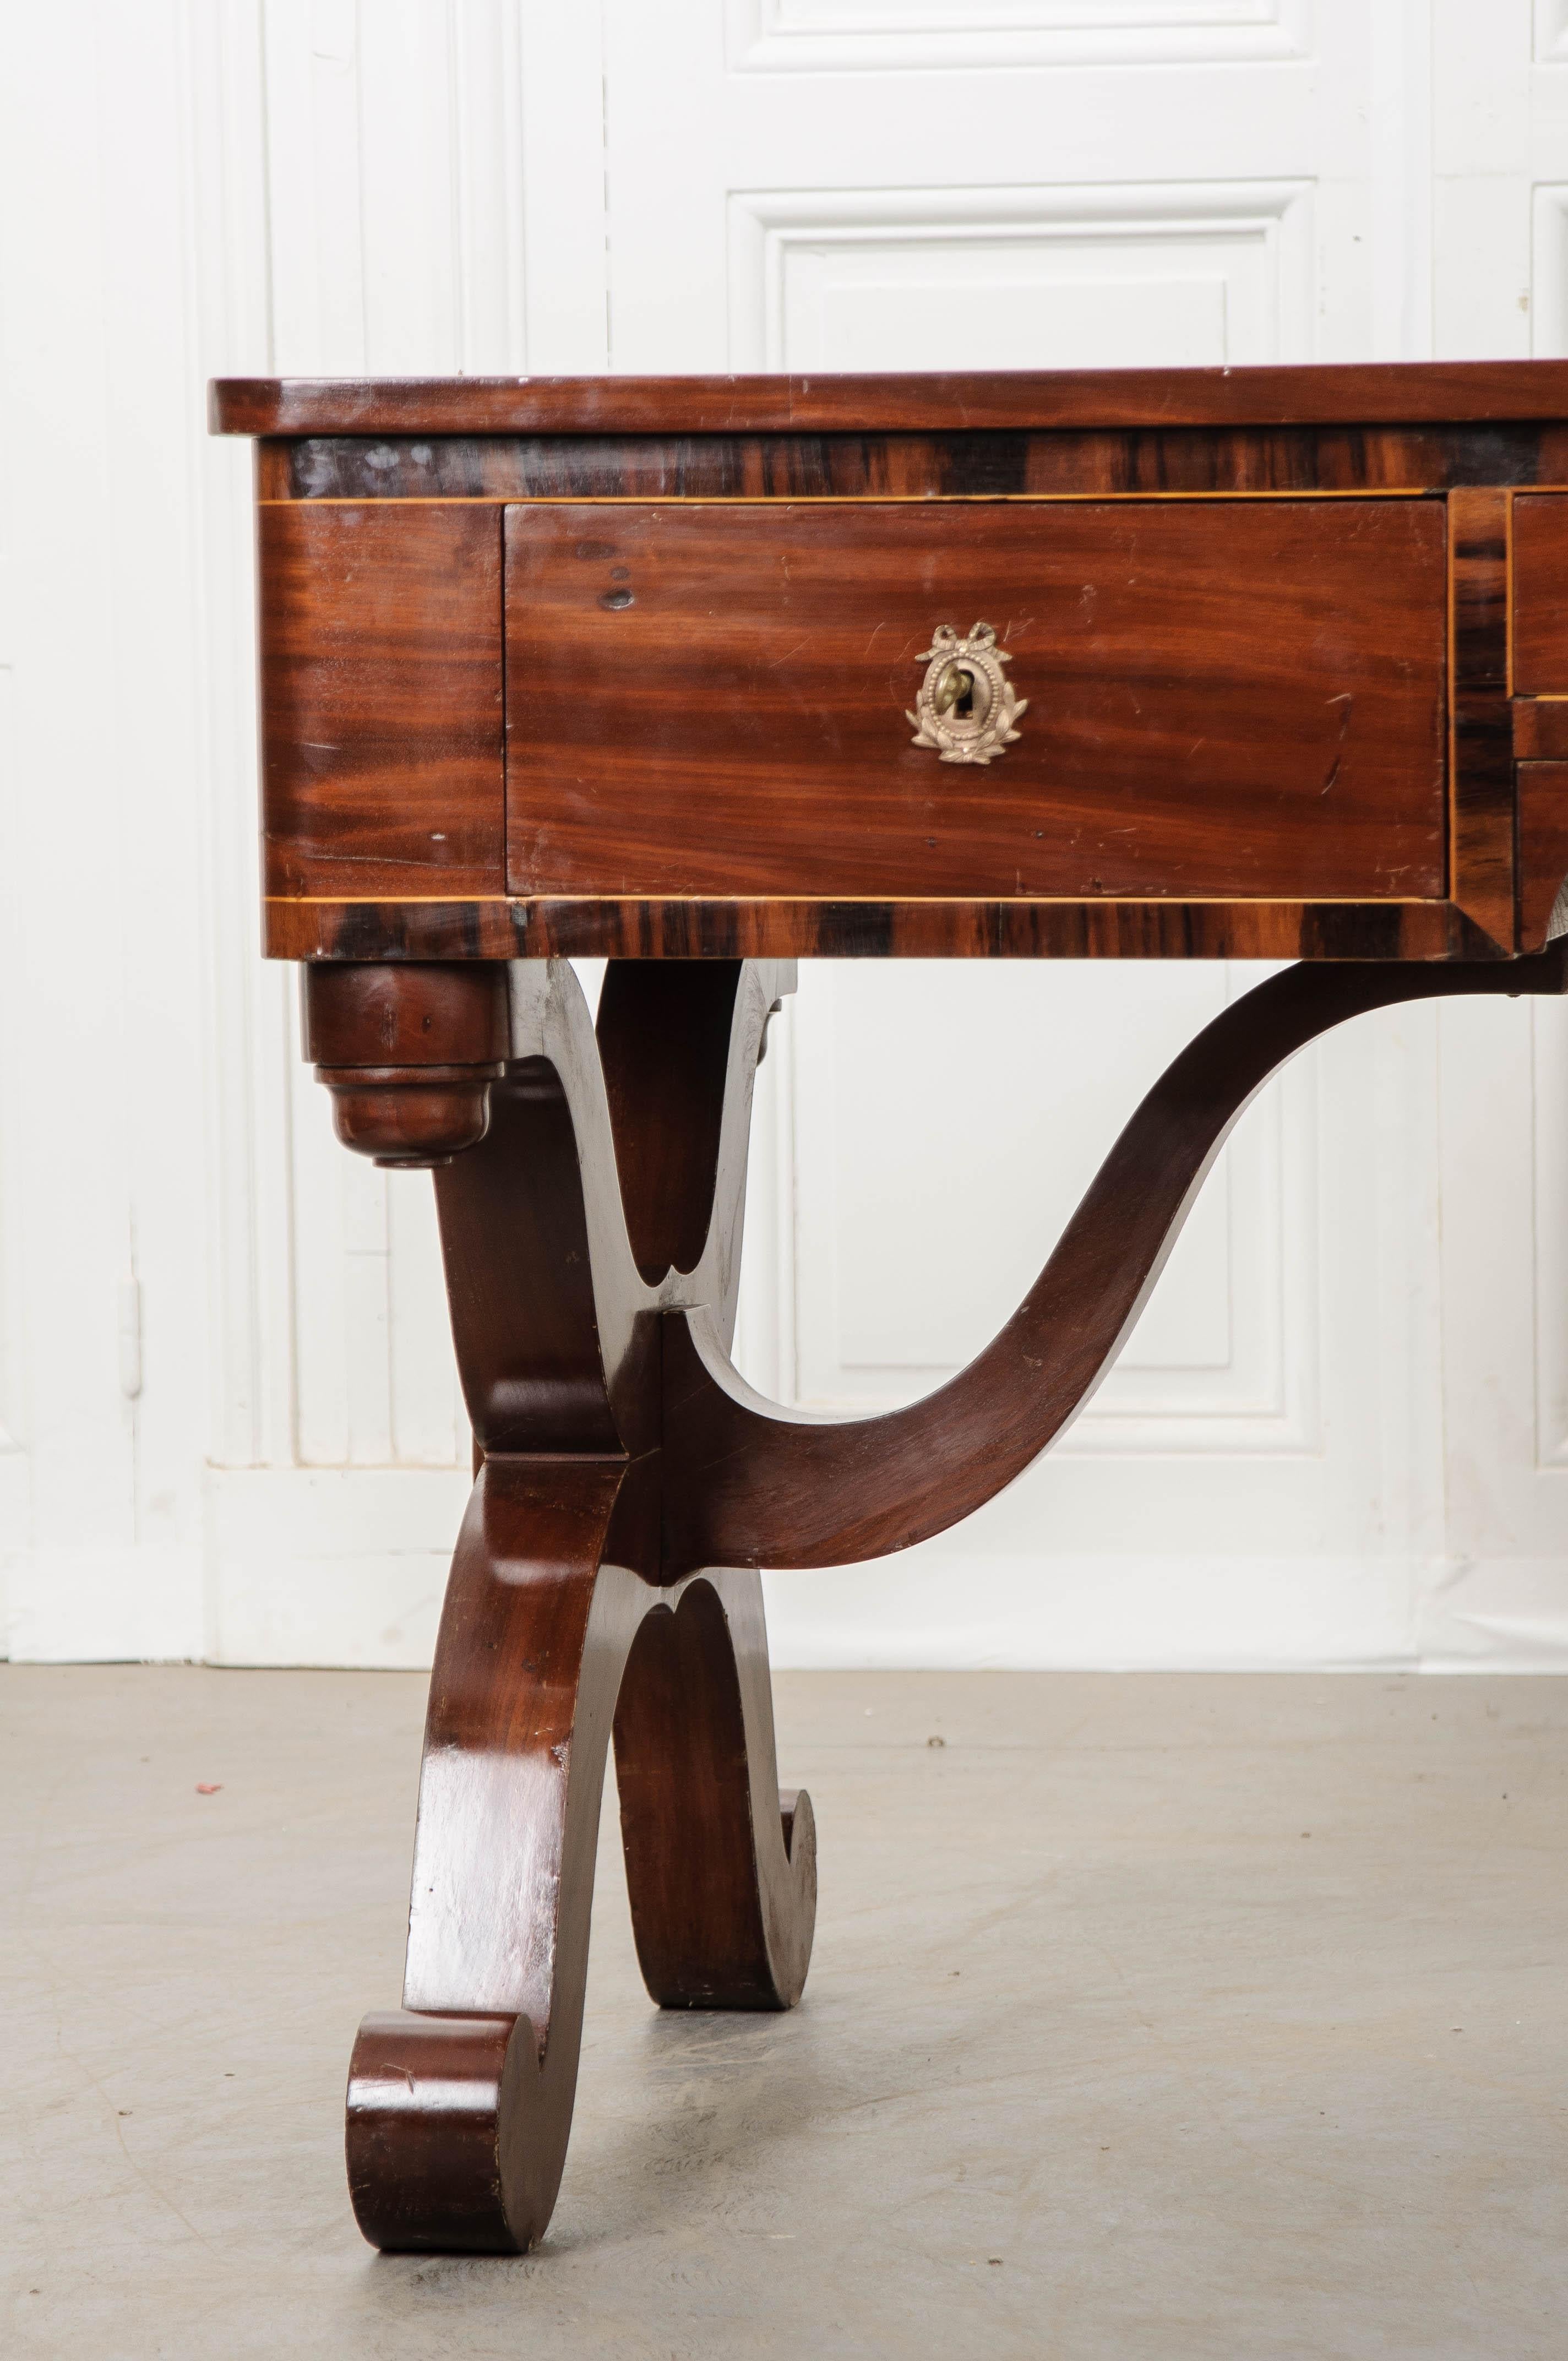 A large, leather-topped mahogany desk from 1870s, France. This exceptional antique incorporates elements of Empire, Restauration and Biedermier styles. The more darkly-toned mahogany is complemented by the desk’s camel-colored leather top, which has